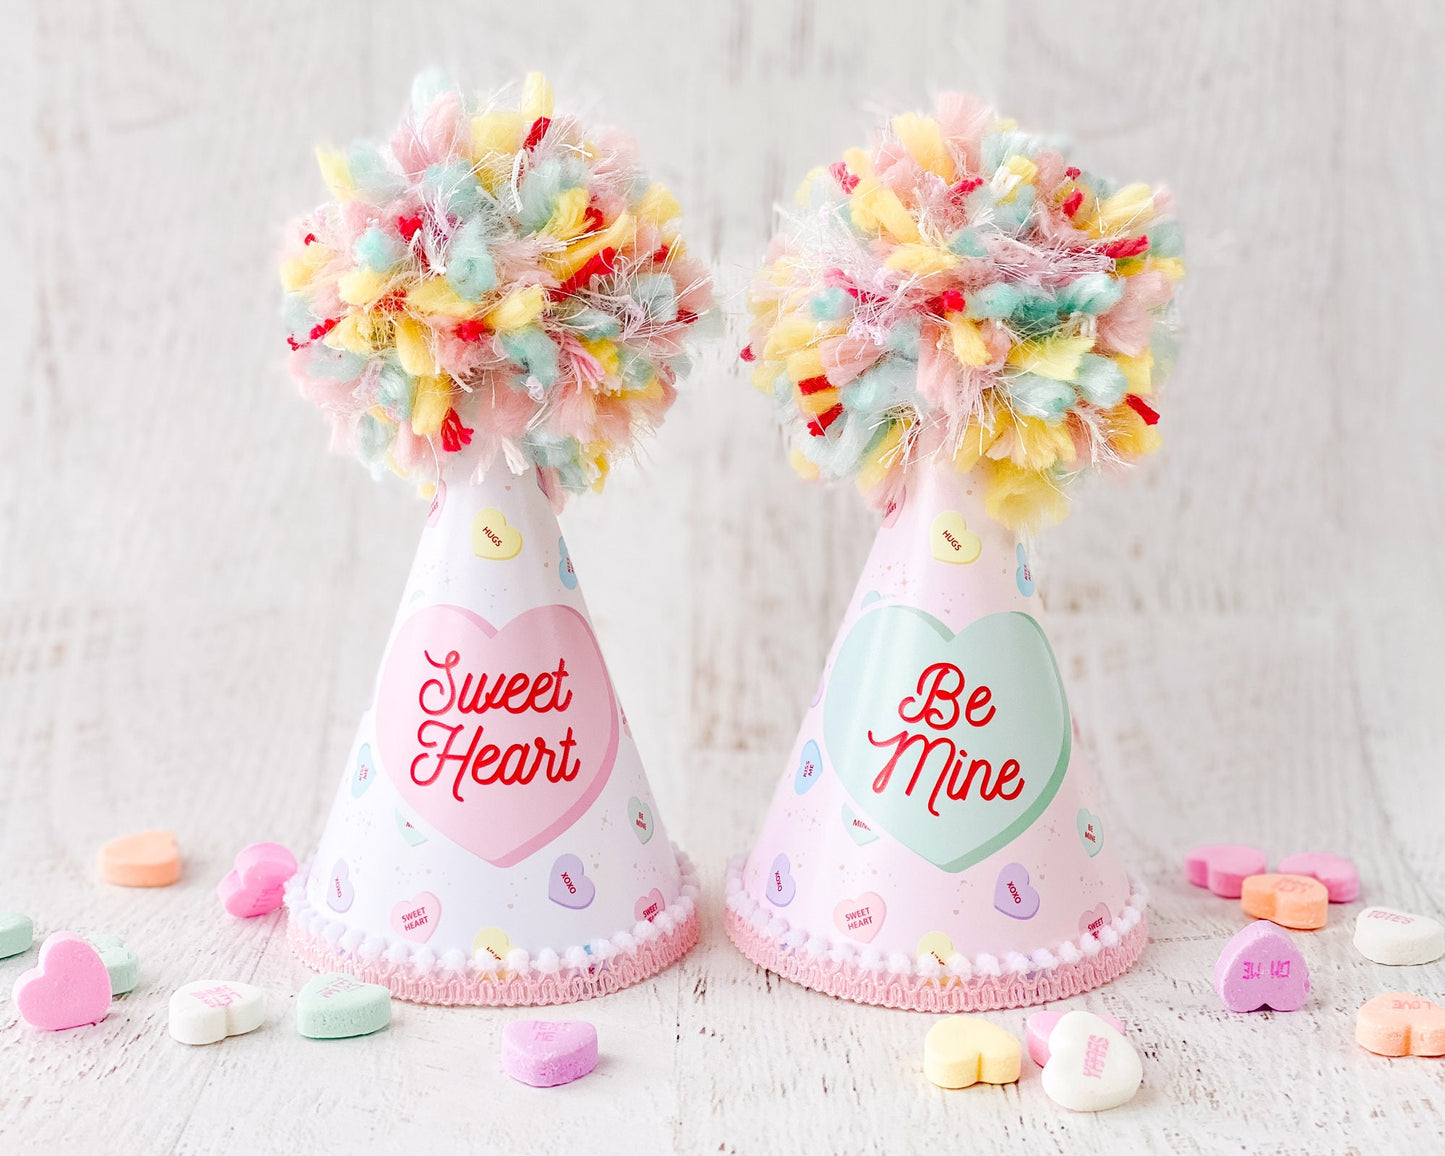 Conversation Hearts Valentine's Day Party Hats || Sweetheart and Be Mine || Printable Valentine's Day Party Decor || Galentine's Day || VD03